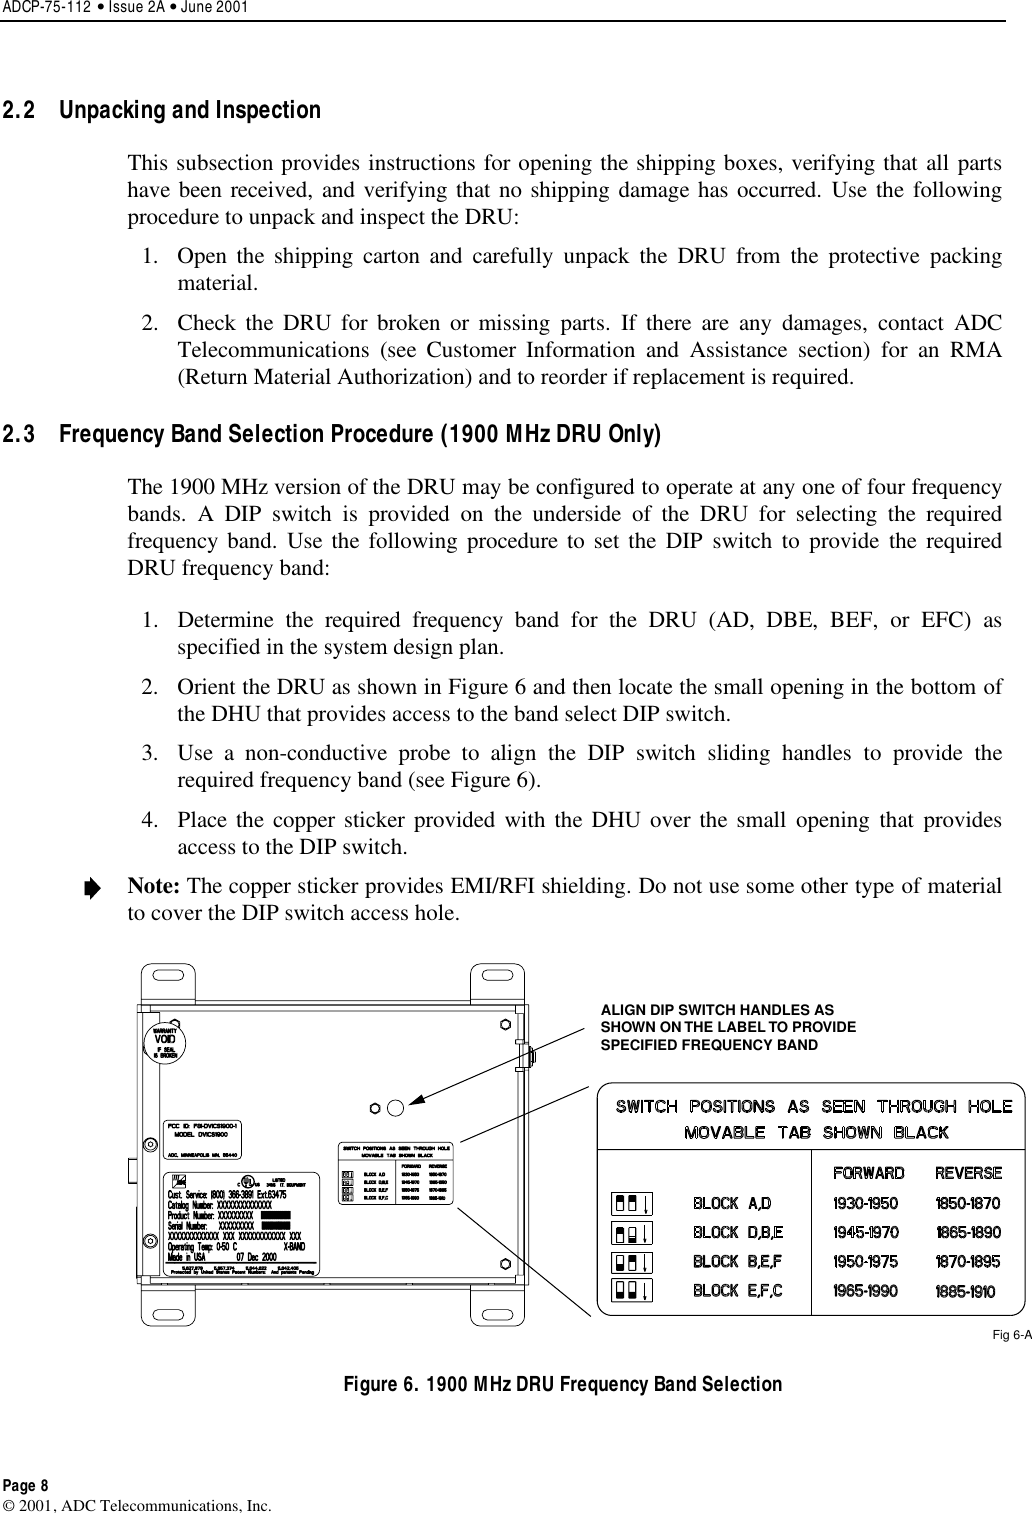 ADCP-75-112 • Issue 2A • June 2001Page 8© 2001, ADC Telecommunications, Inc.2.2  Unpacking and InspectionThis subsection provides instructions for opening the shipping boxes, verifying that all partshave been received, and verifying that no shipping damage has occurred. Use the followingprocedure to unpack and inspect the DRU:1. Open the shipping carton and carefully unpack the DRU from the protective packingmaterial.2. Check the DRU for broken or missing parts. If there are any damages, contact ADCTelecommunications (see Customer Information and Assistance section) for an RMA(Return Material Authorization) and to reorder if replacement is required.2.3  Frequency Band Selection Procedure (1900 MHz DRU Only)The 1900 MHz version of the DRU may be configured to operate at any one of four frequencybands. ADIP switch is provided on the underside of the DRU for selecting the requiredfrequency band. Use the following procedure to set the DIP switch to provide the requiredDRU frequency band:1. Determine the required frequency band for the DRU (AD, DBE, BEF, or EFC) asspecified in the system design plan.2. Orient the DRU as shown in Figure 6 and then locate the small opening in the bottom ofthe DHU that provides access to the band select DIP switch.3. Use anon-conductive probe to align the DIP switch sliding handles to provide therequired frequency band (see Figure 6).4. Place the copper sticker provided with the DHU over the small opening that providesaccess to the DIP switch.Note: The copper sticker provides EMI/RFI shielding. Do not use some other type of materialto cover the DIP switch access hole.ALIGN DIP SWITCH HANDLES ASSHOWN ON THE LABEL TO PROVIDESPECIFIED FREQUENCY BANDFig 6-AFigure 6. 1900 MHz DRU Frequency Band Selection